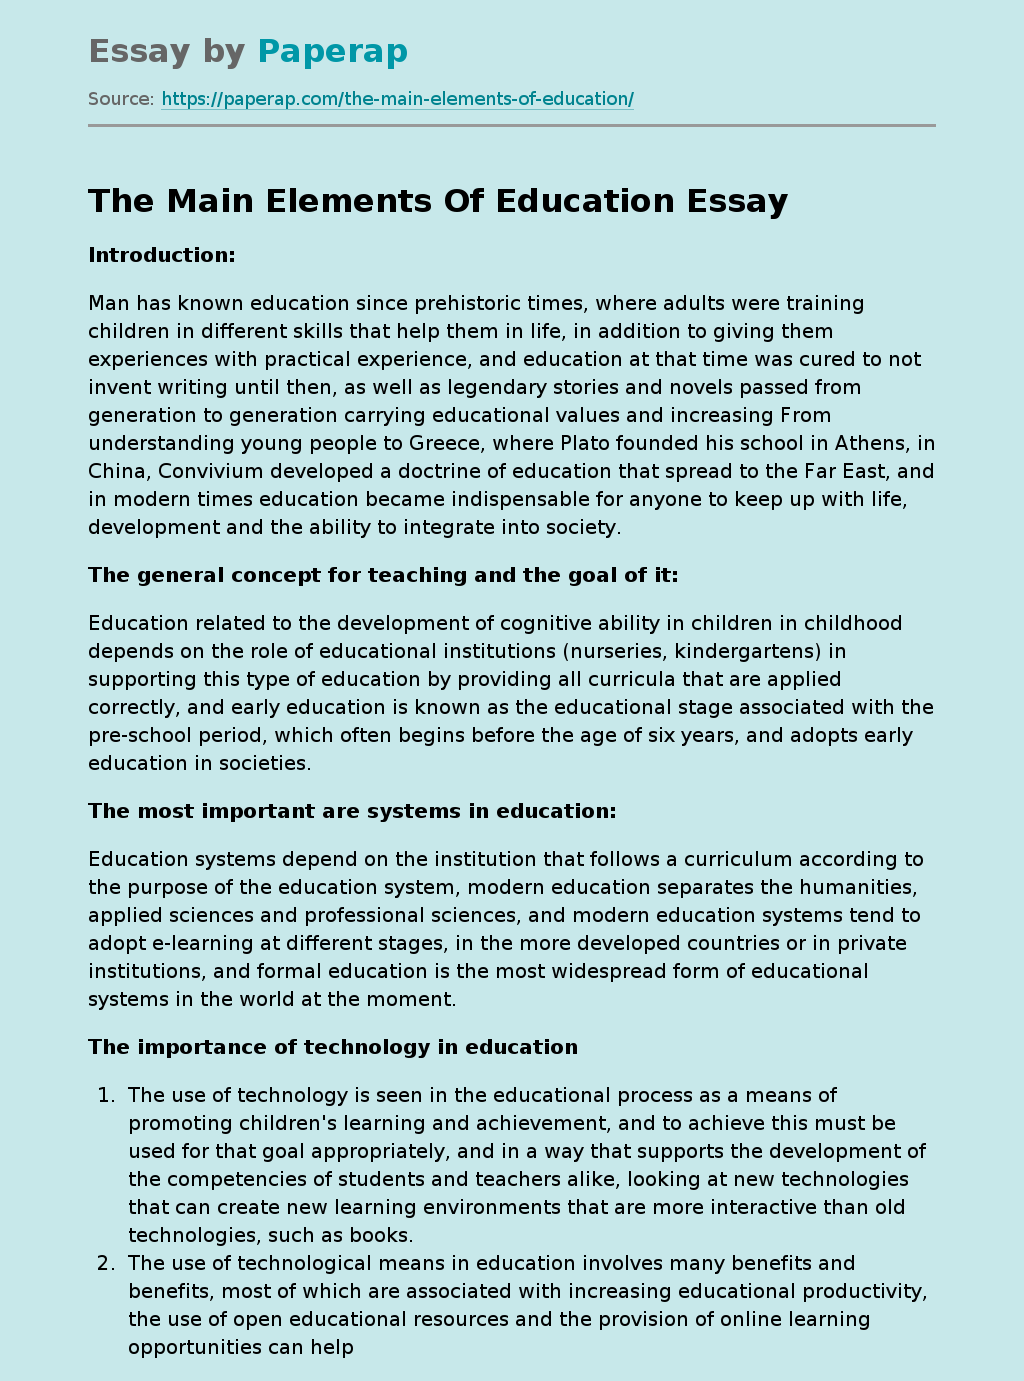 The Main Elements Of Education